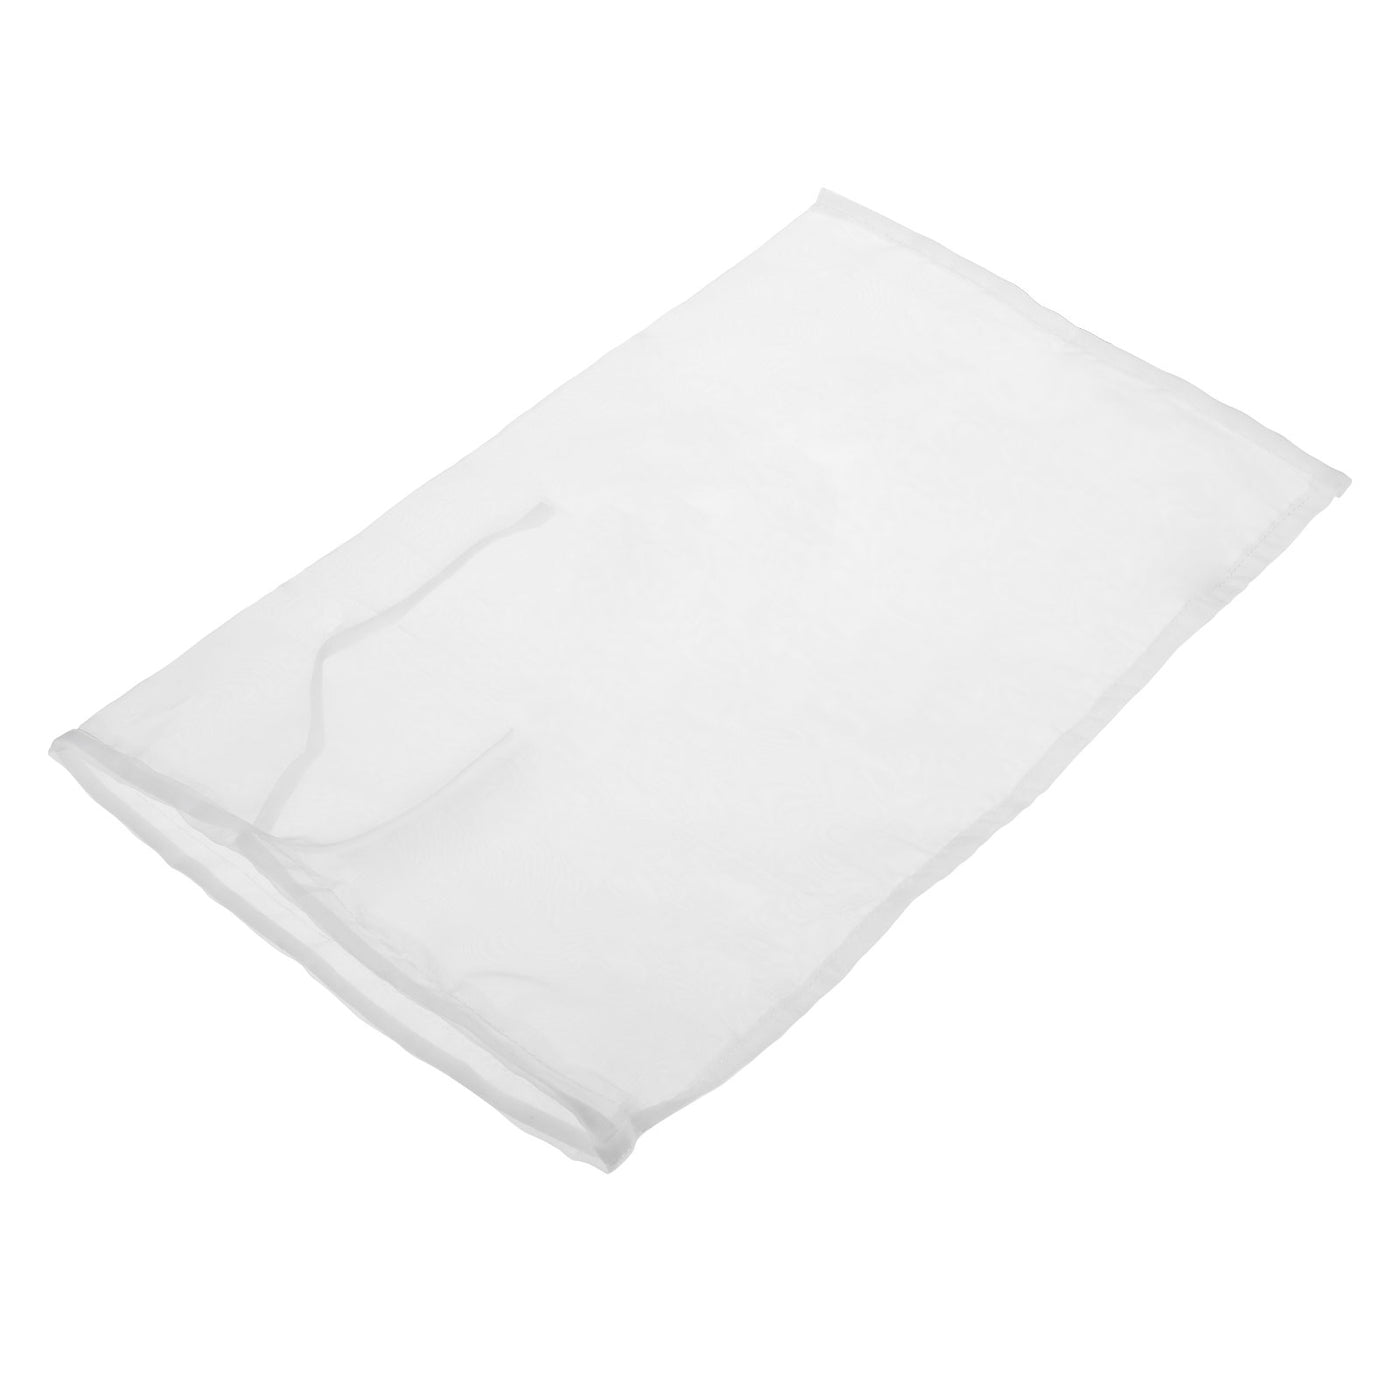 uxcell Uxcell Paint Filter Bag 80 Mesh (17.7"x11.8") Nylon Strainer for Filtering Paint